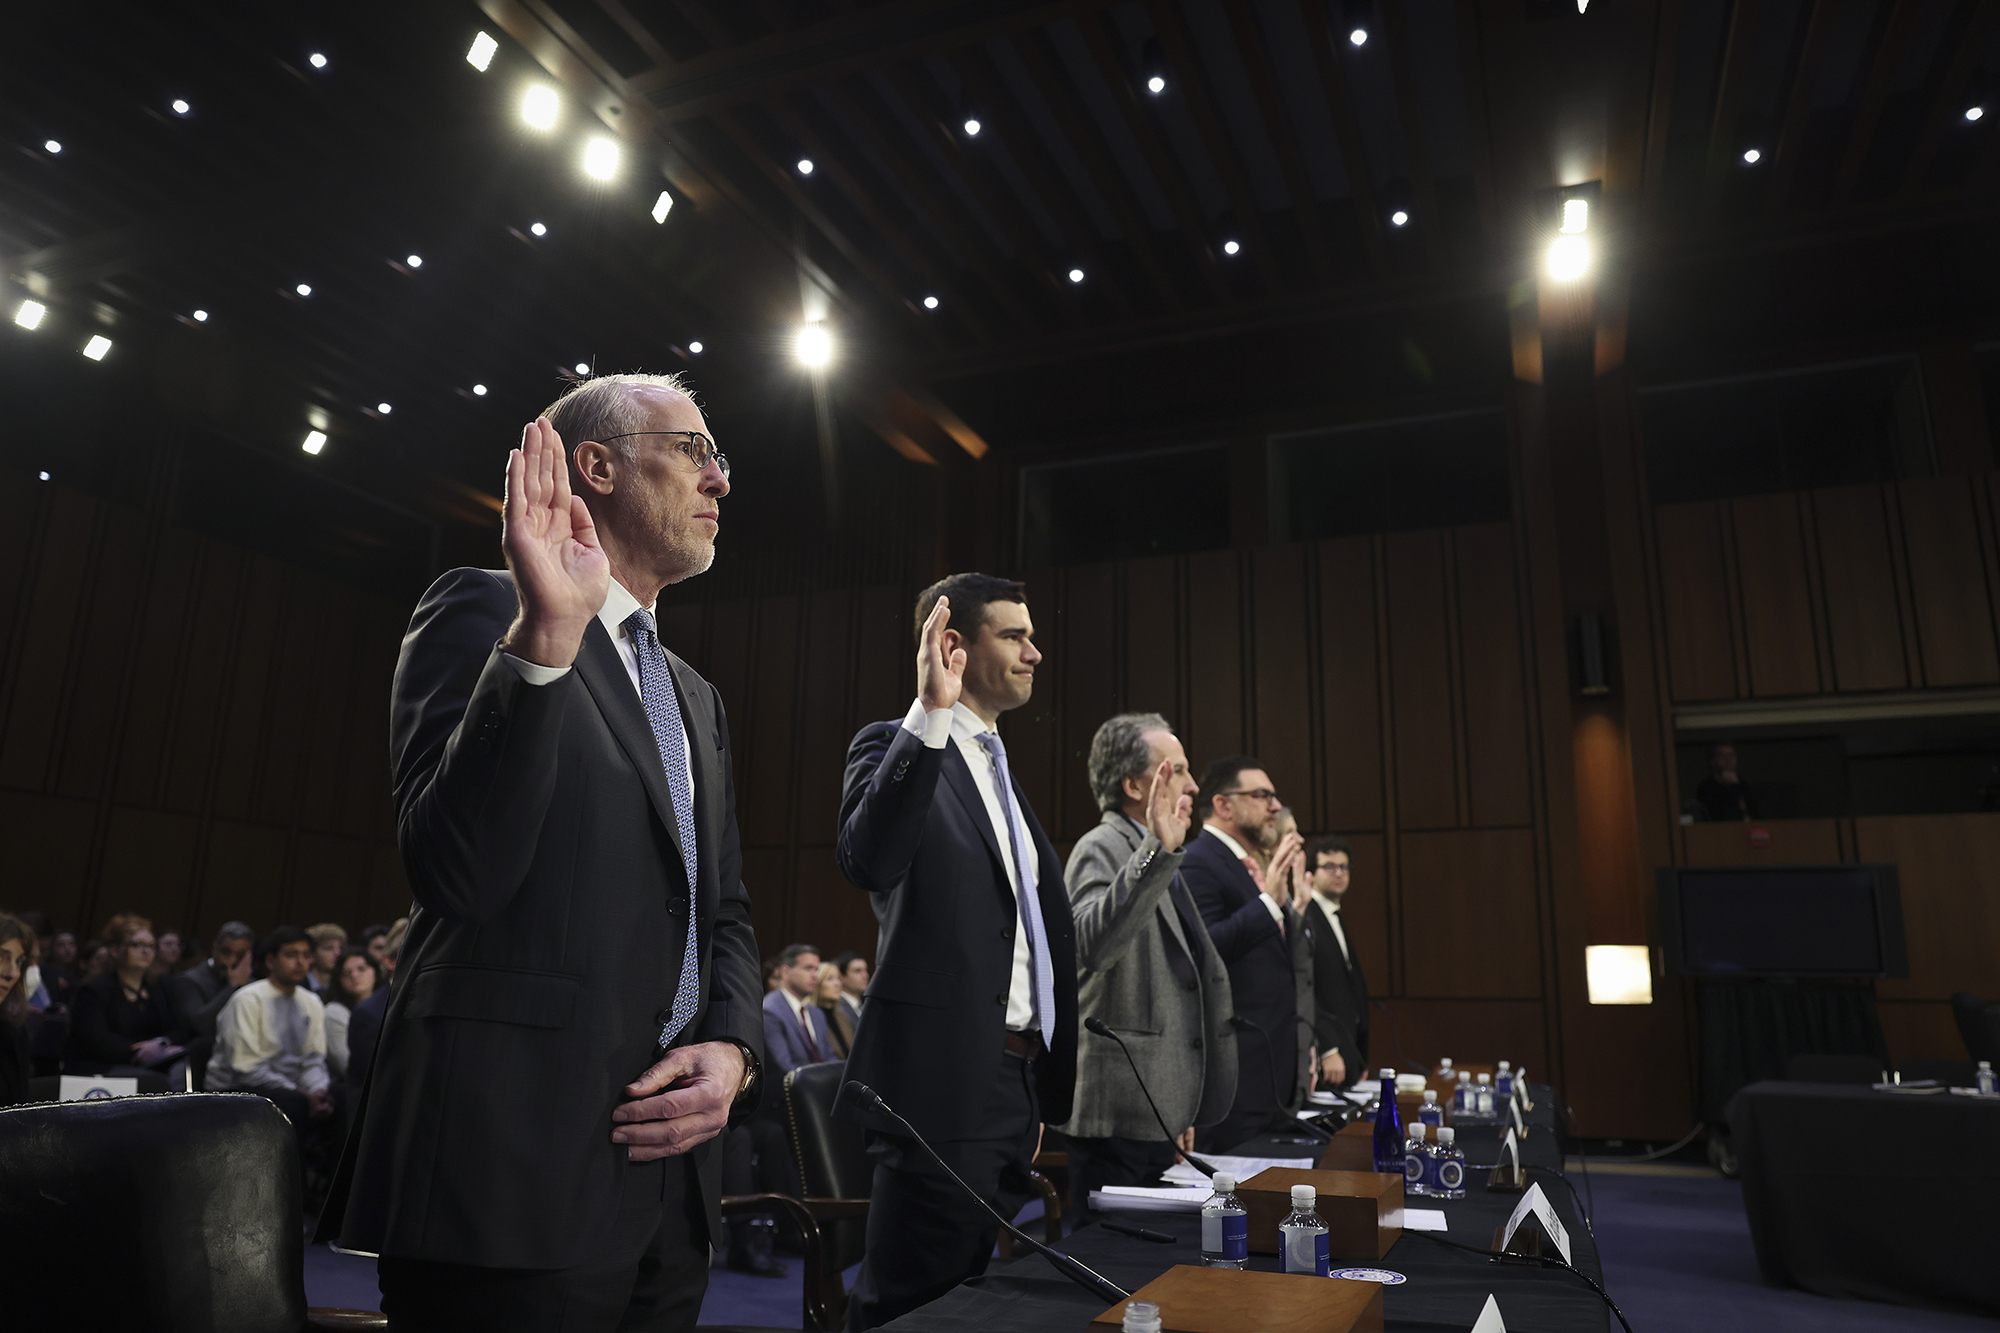 Joe Berchtold (L), president and CFO of Live Nation Entertainment, Inc., and other members of the ticketing and entertainment industry are sworn in before the Senate Judiciary Committee January 24.